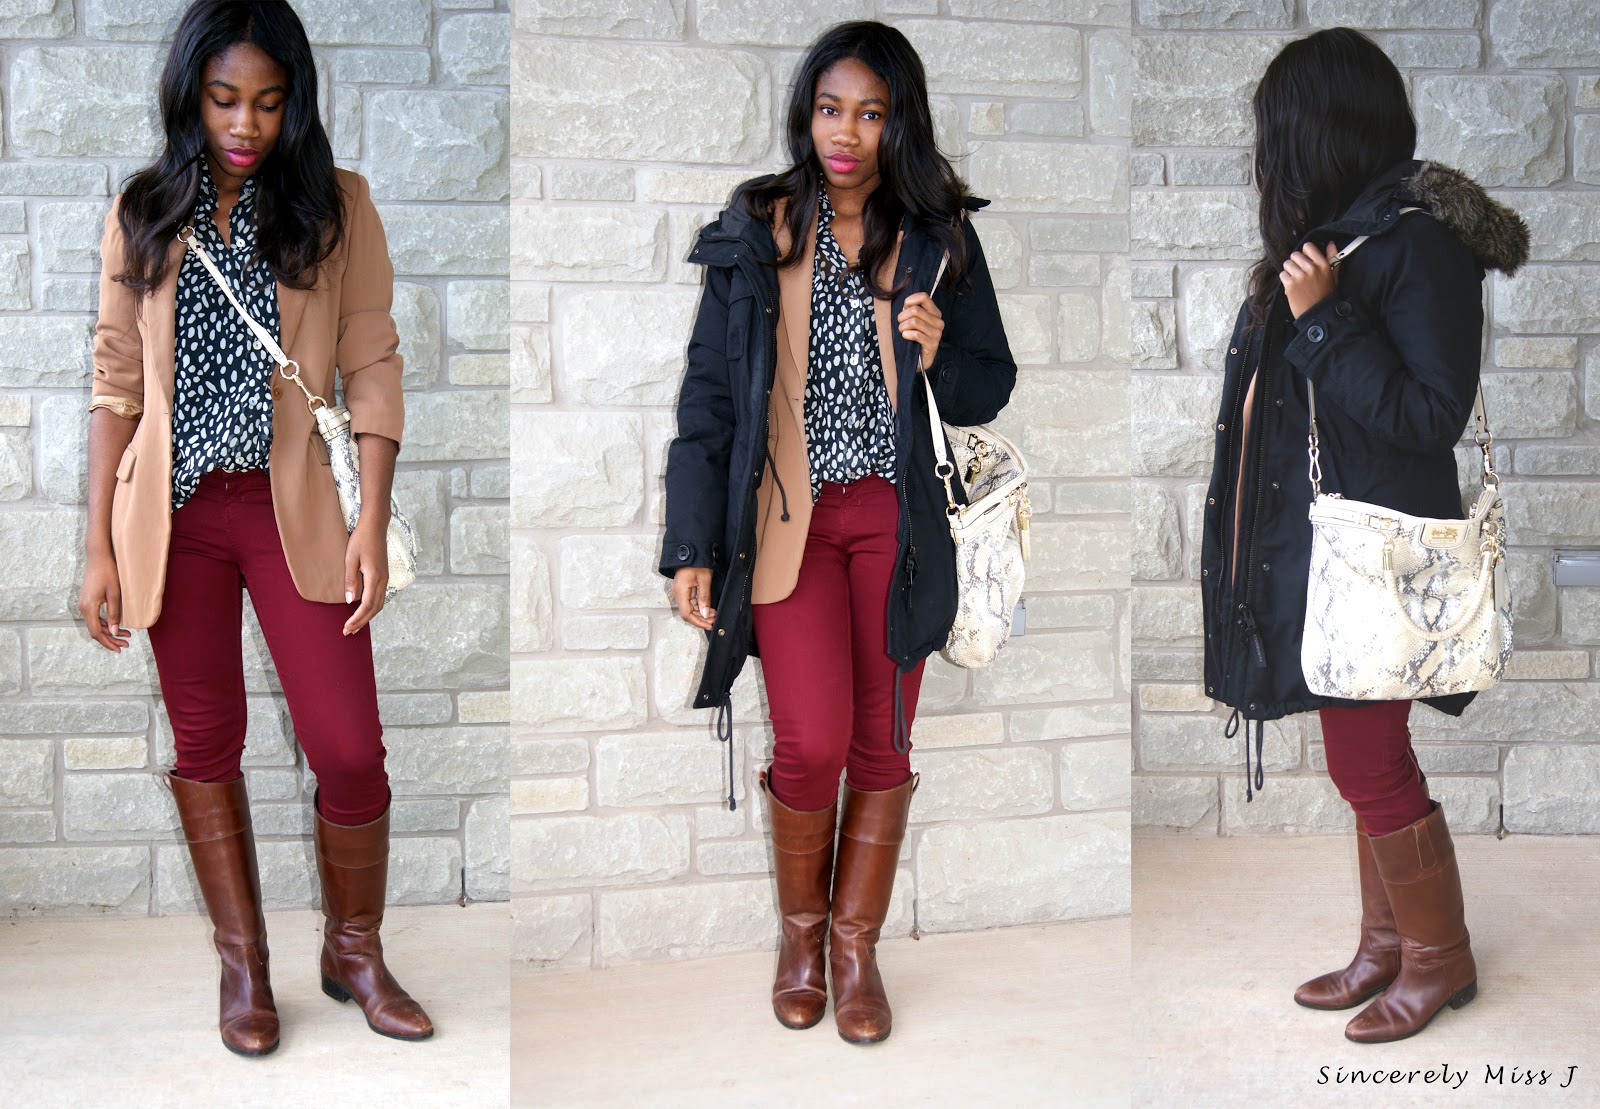 Outfit Information: Blazer & blouse & Boots: thrifted, Bag: Coach, Coat: Aritzia, Jeans: Guess